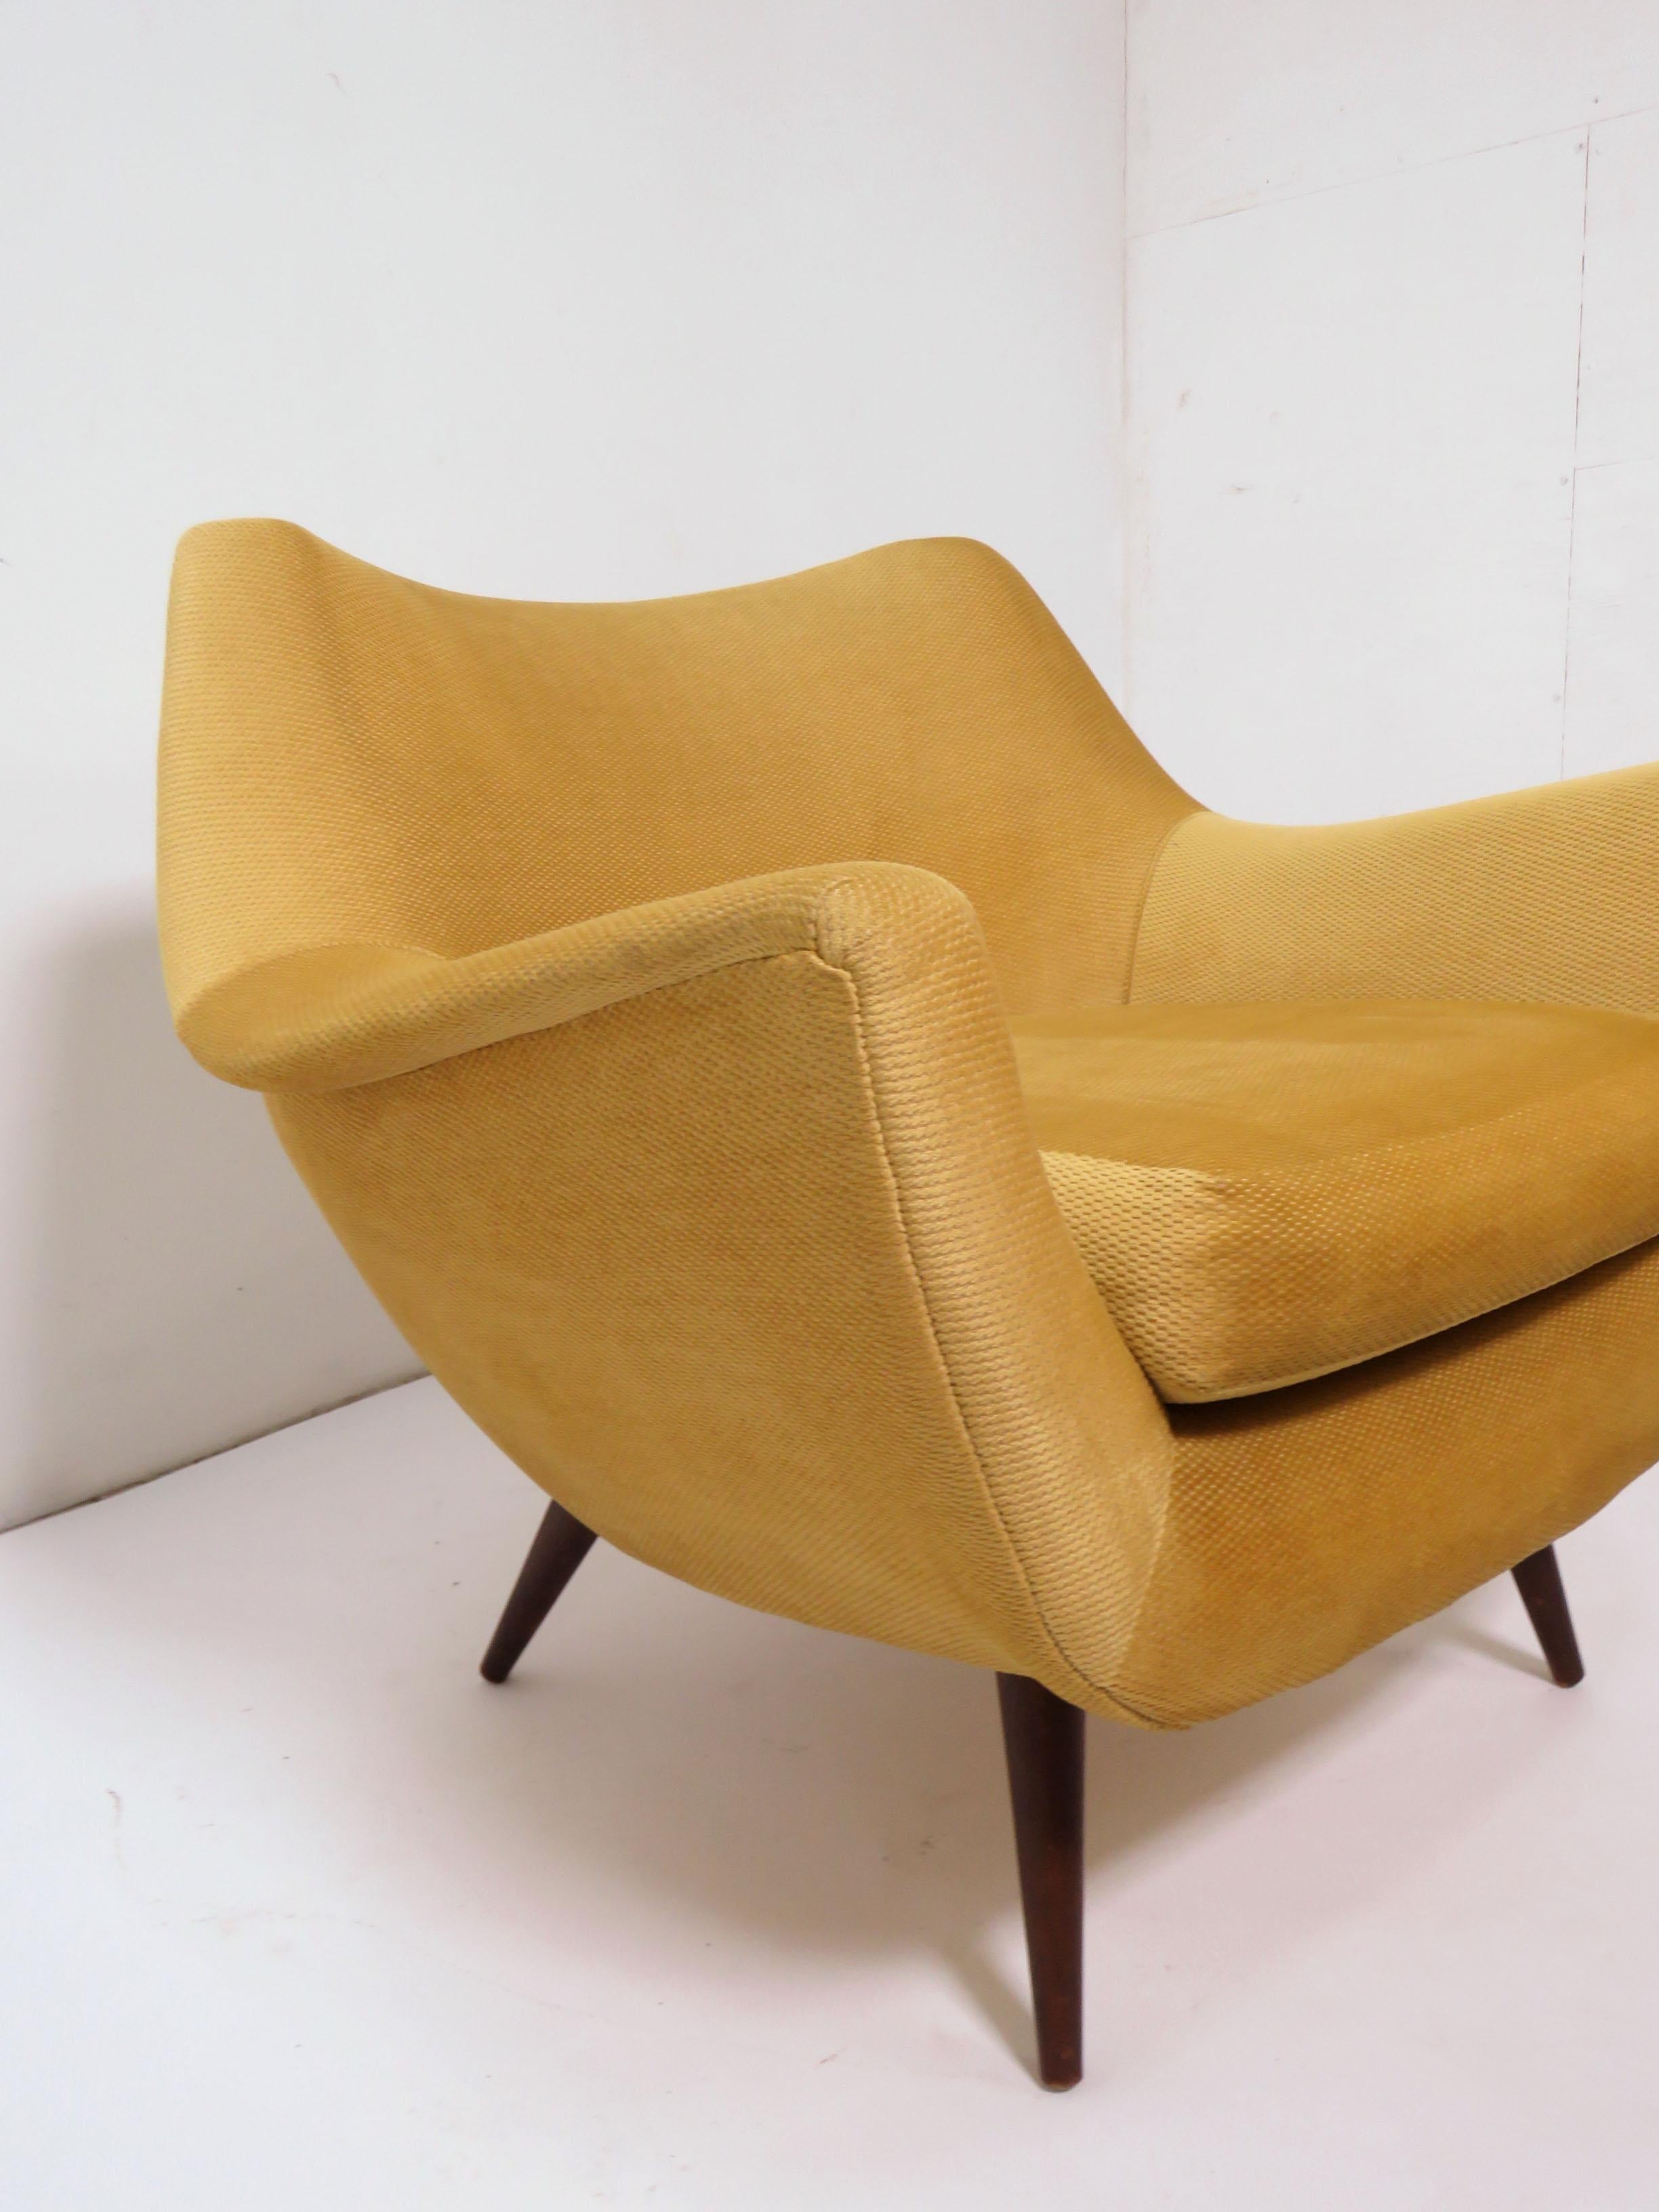 Lawrence Peabody Midcentury Lounge Chair and Ottoman, circa 1950s 1